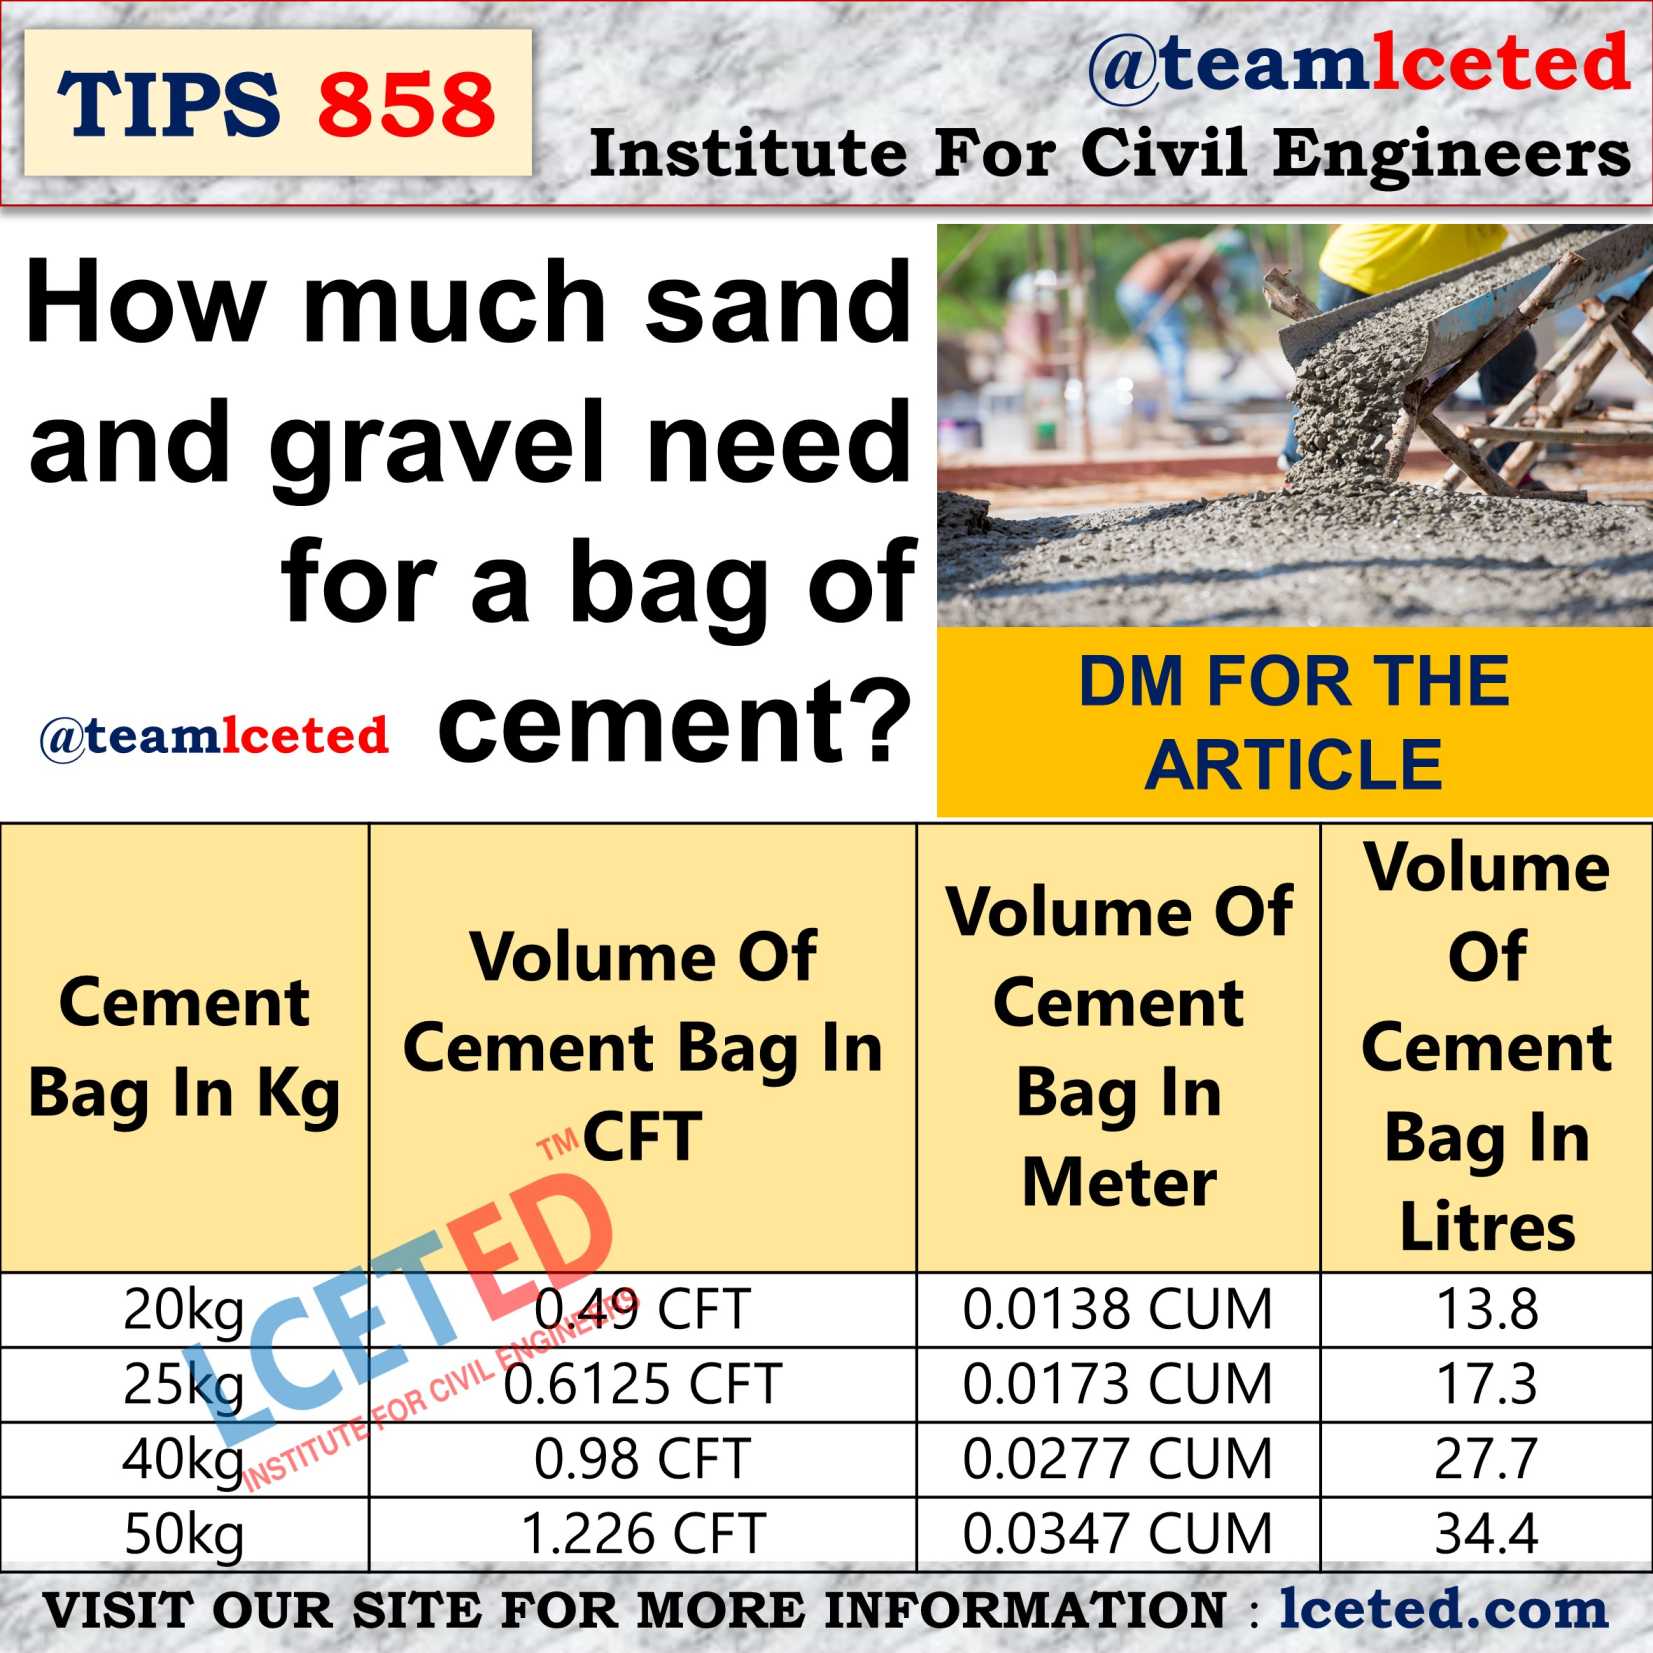 Sand and gravel need for a bag of cement?